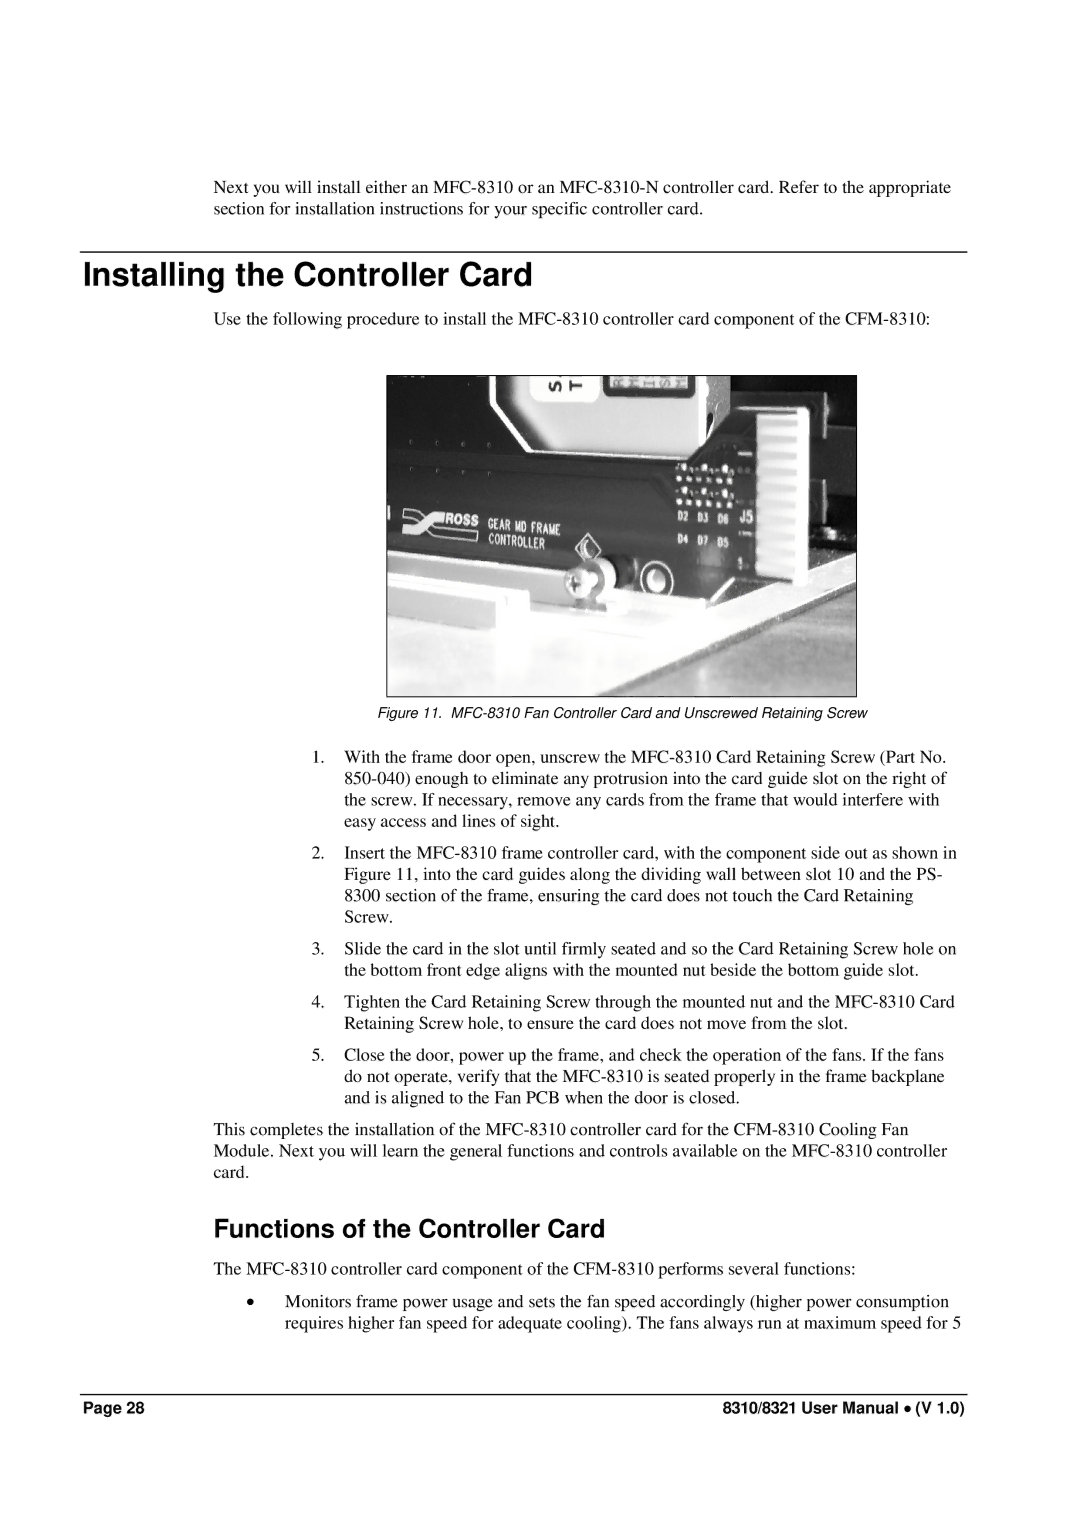 Cobalt Networks 8310(-C), 8321(-C) user manual Installing the Controller Card, Functions of the Controller Card 